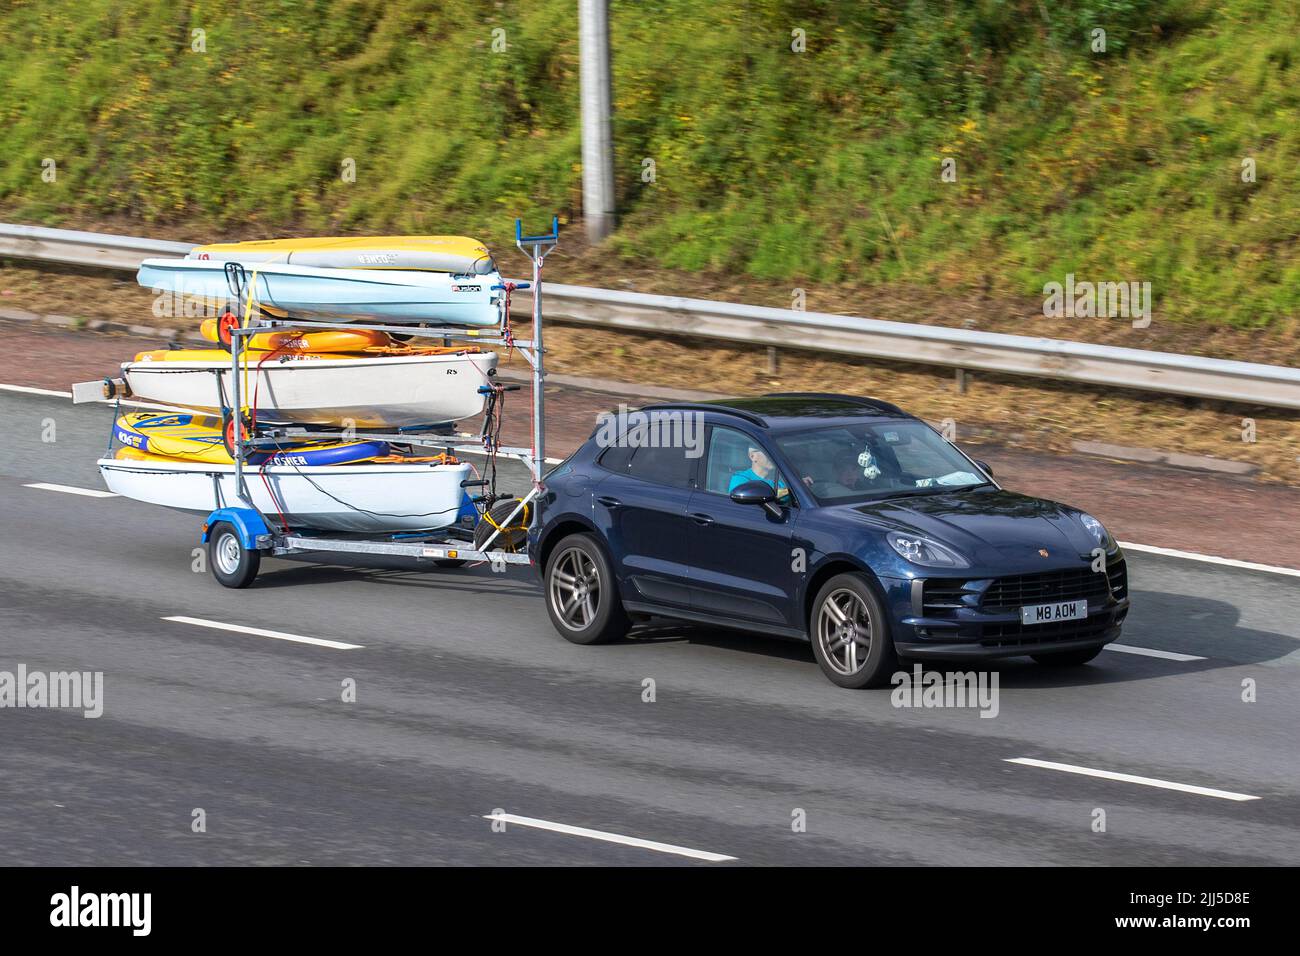 2019 PORSCHE MACAN S PDK 2995cc 7-speed semi-automatic towing Kayak, water sports canoe trailer; traveling on the M6 motorway, UK Stock Photo